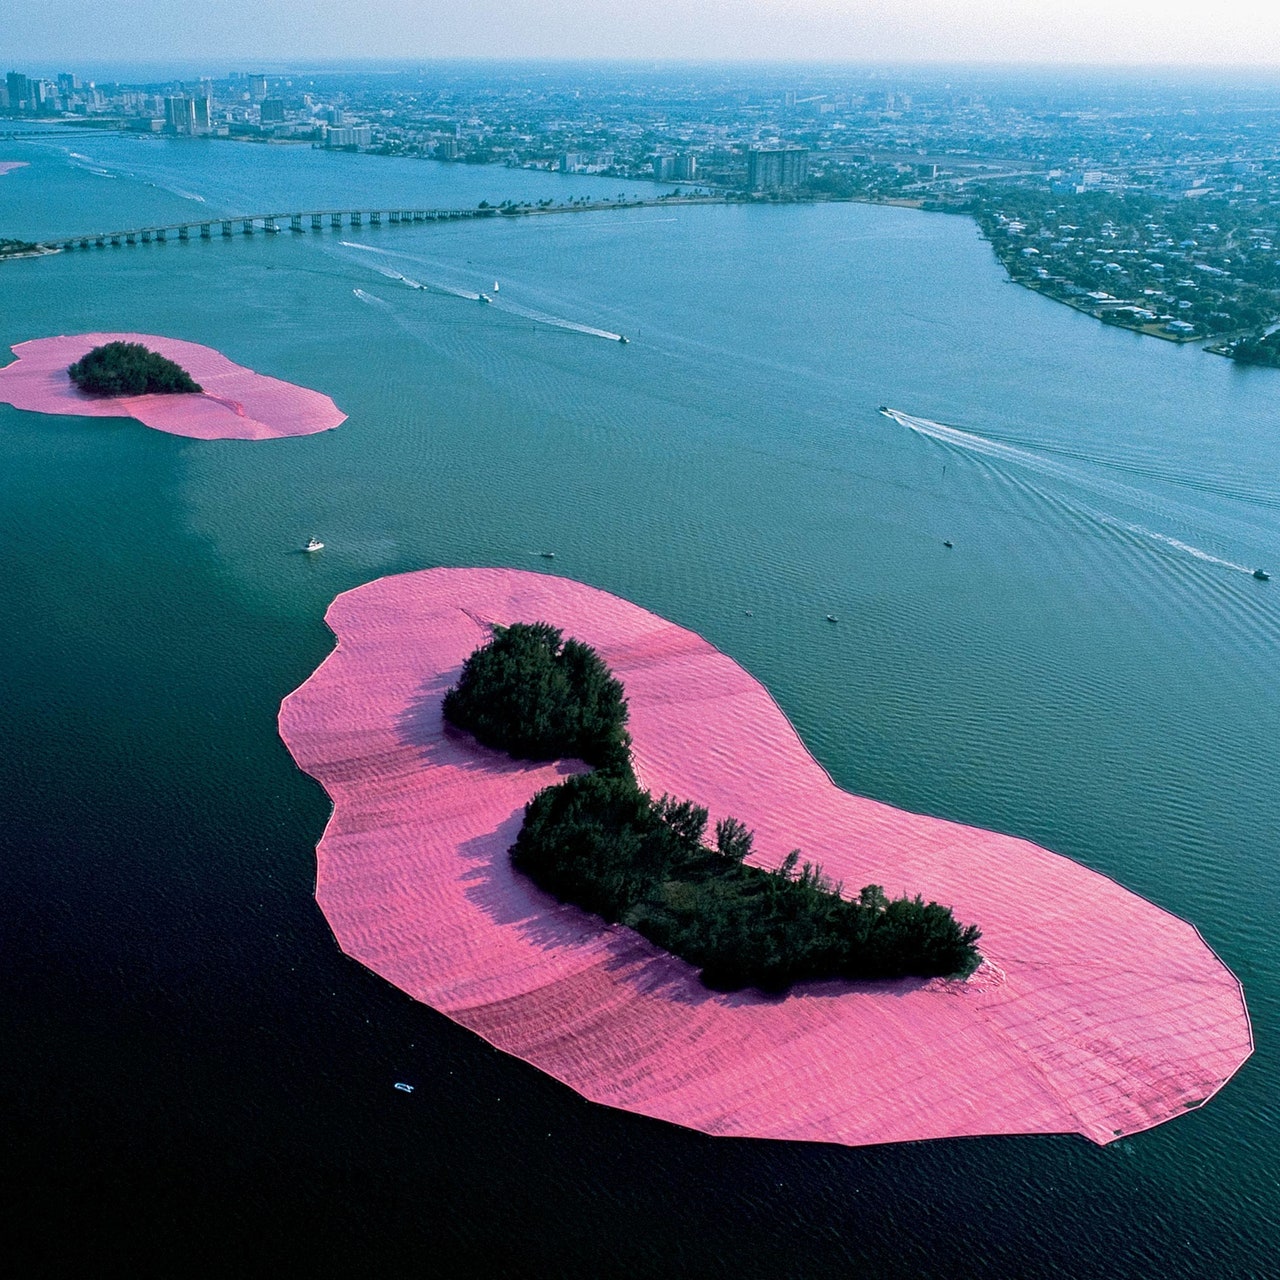 CHRISTO AND JEANNE-CLAUDE · 40th Ed.